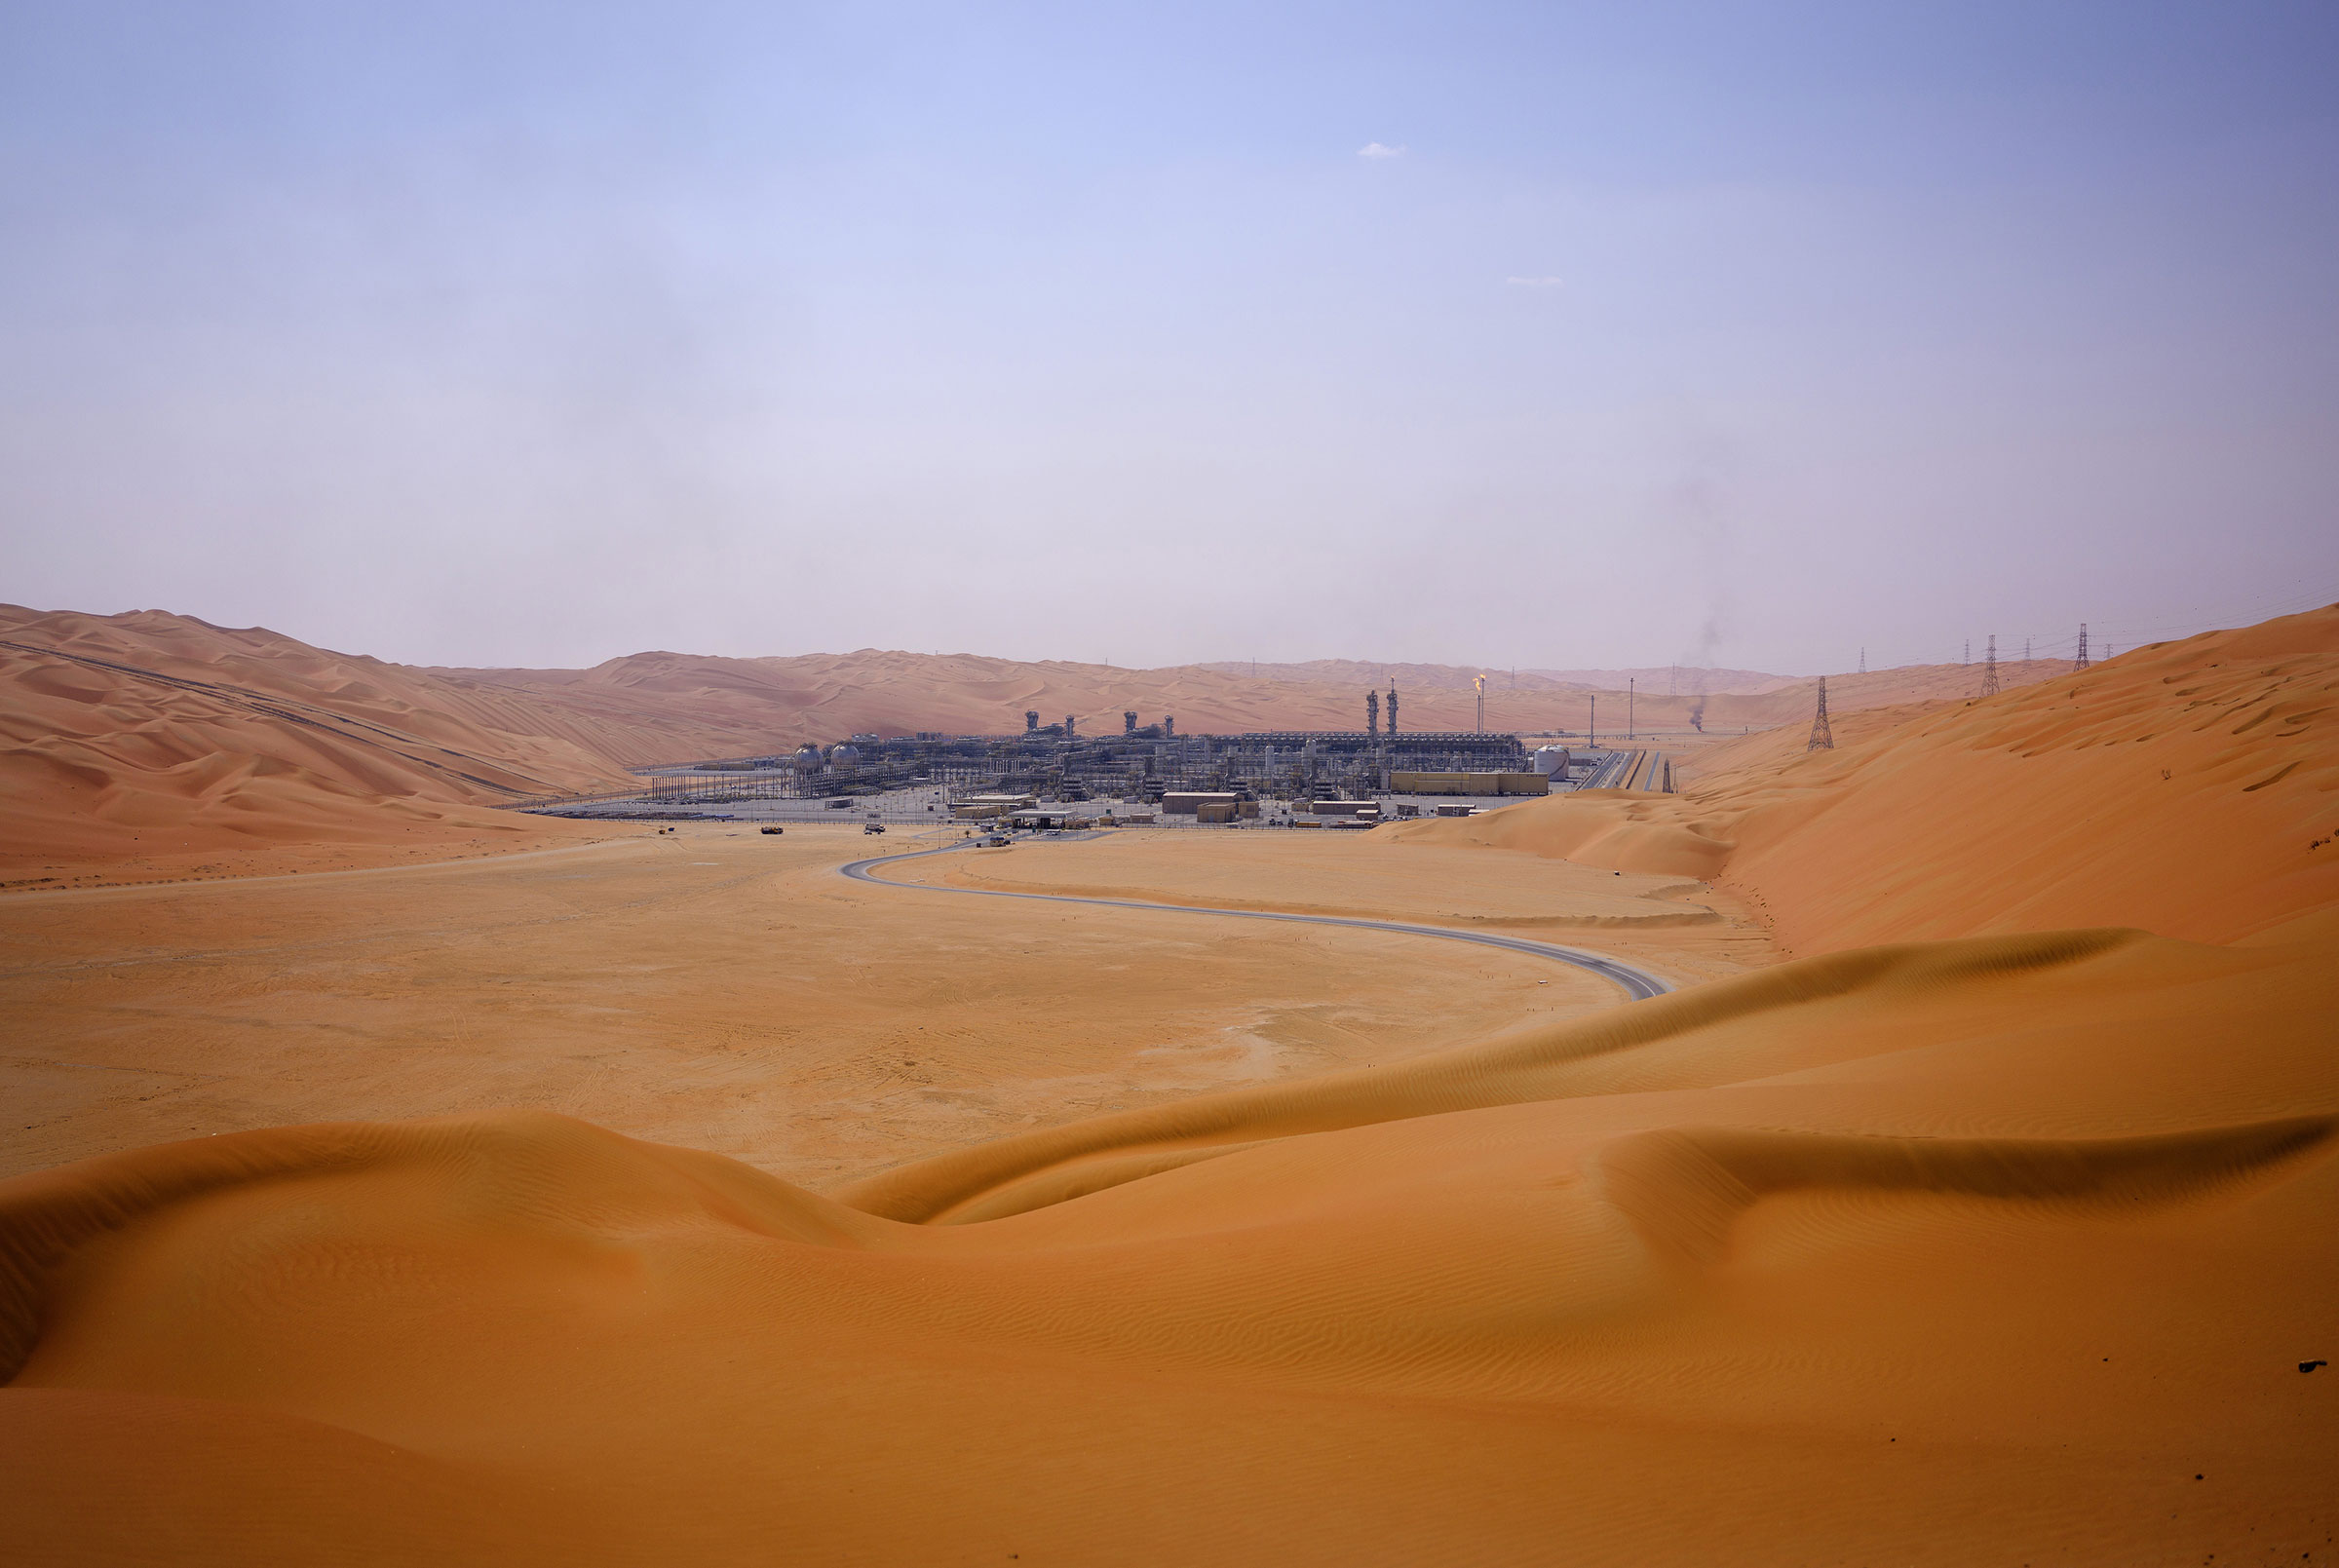 Saudi Aramco’s Shaybah Natural Gas Liquids (NGL) facility in the Empty Quarter desert dunes (Simon Dawson—Bloomberg/Getty Images)